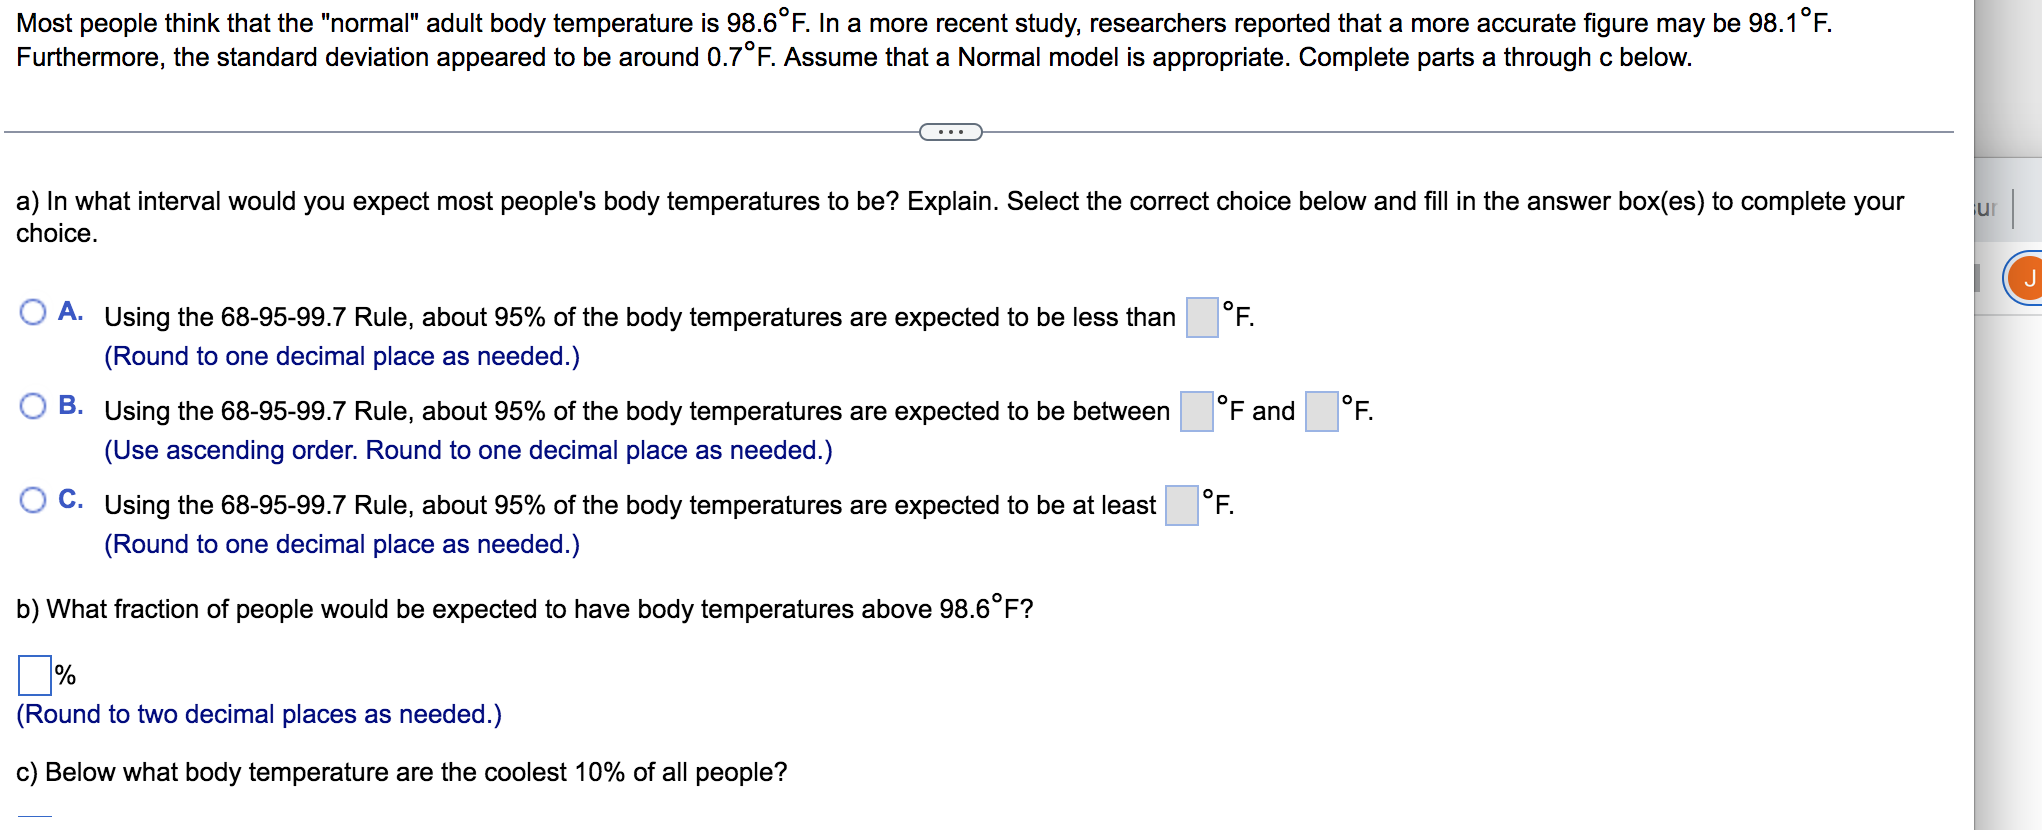 Think your normal temperature is 98.6? Maybe not (and why that's